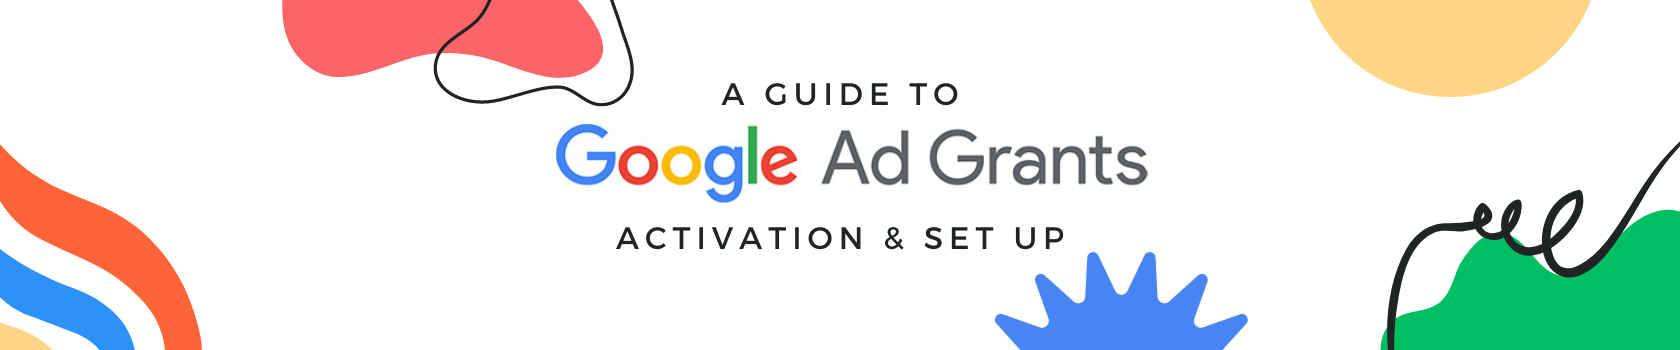 A guide to Google Ad Grants Activation & Set Up